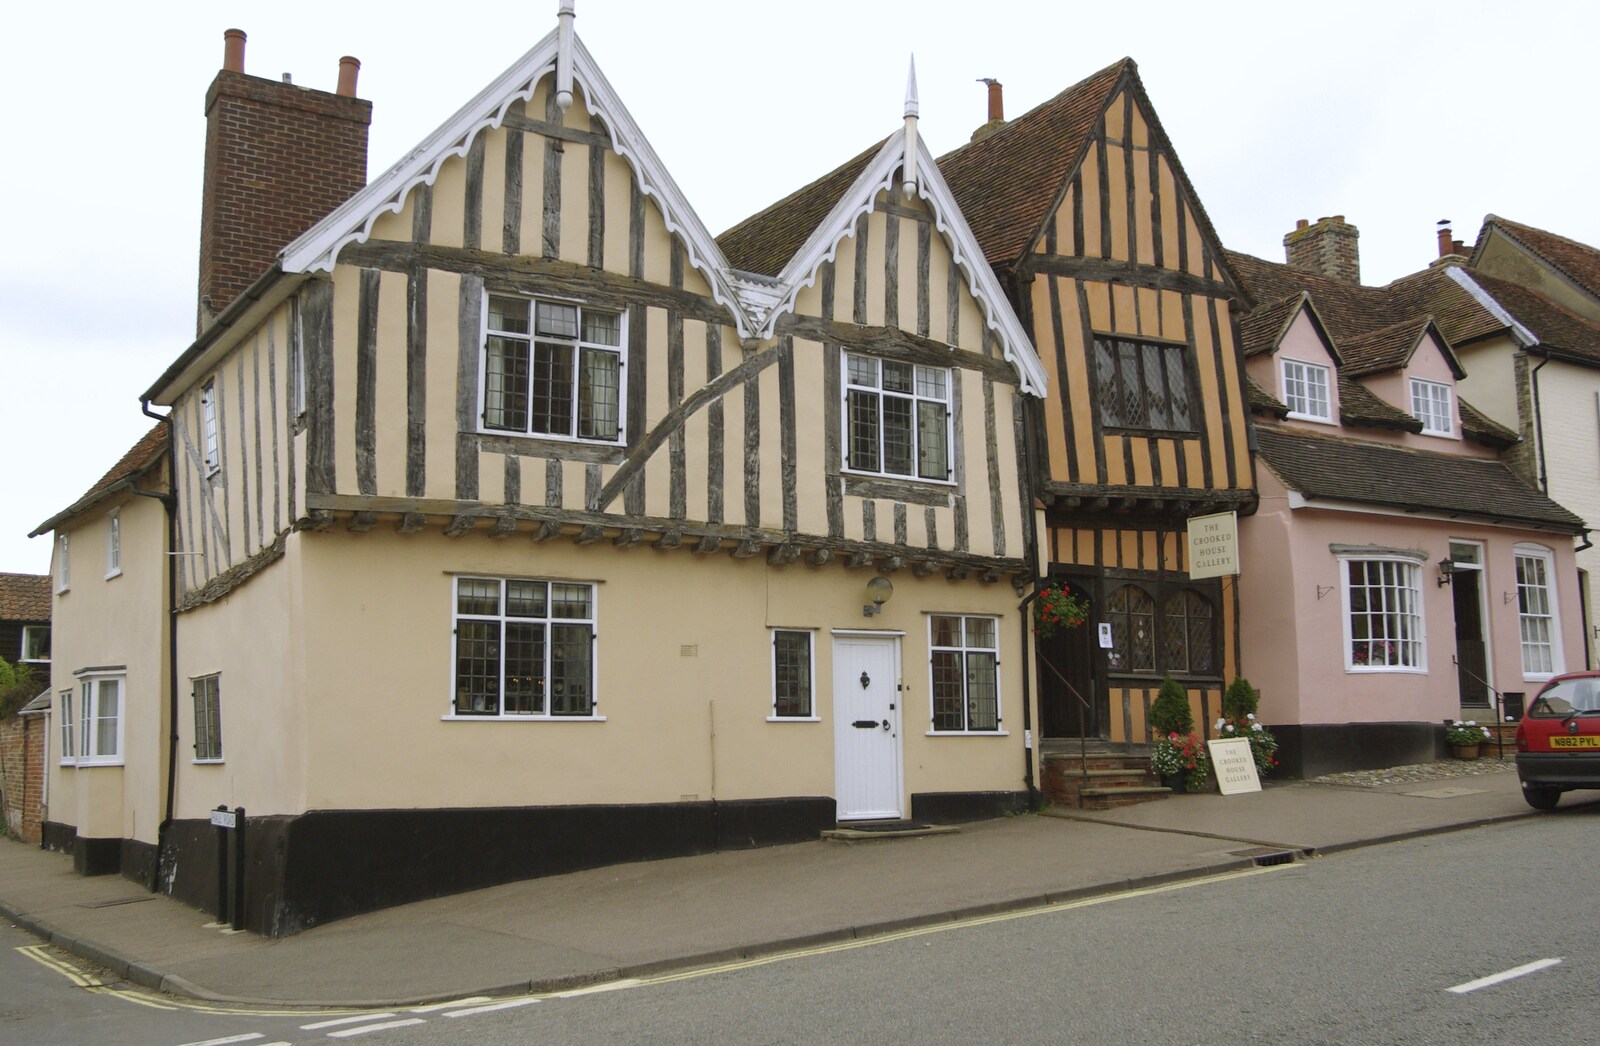 A slightly crooked house from A Road Trip in an MX-5, and Athlete at the UEA, Lavenham and Norwich - 14th October 2007